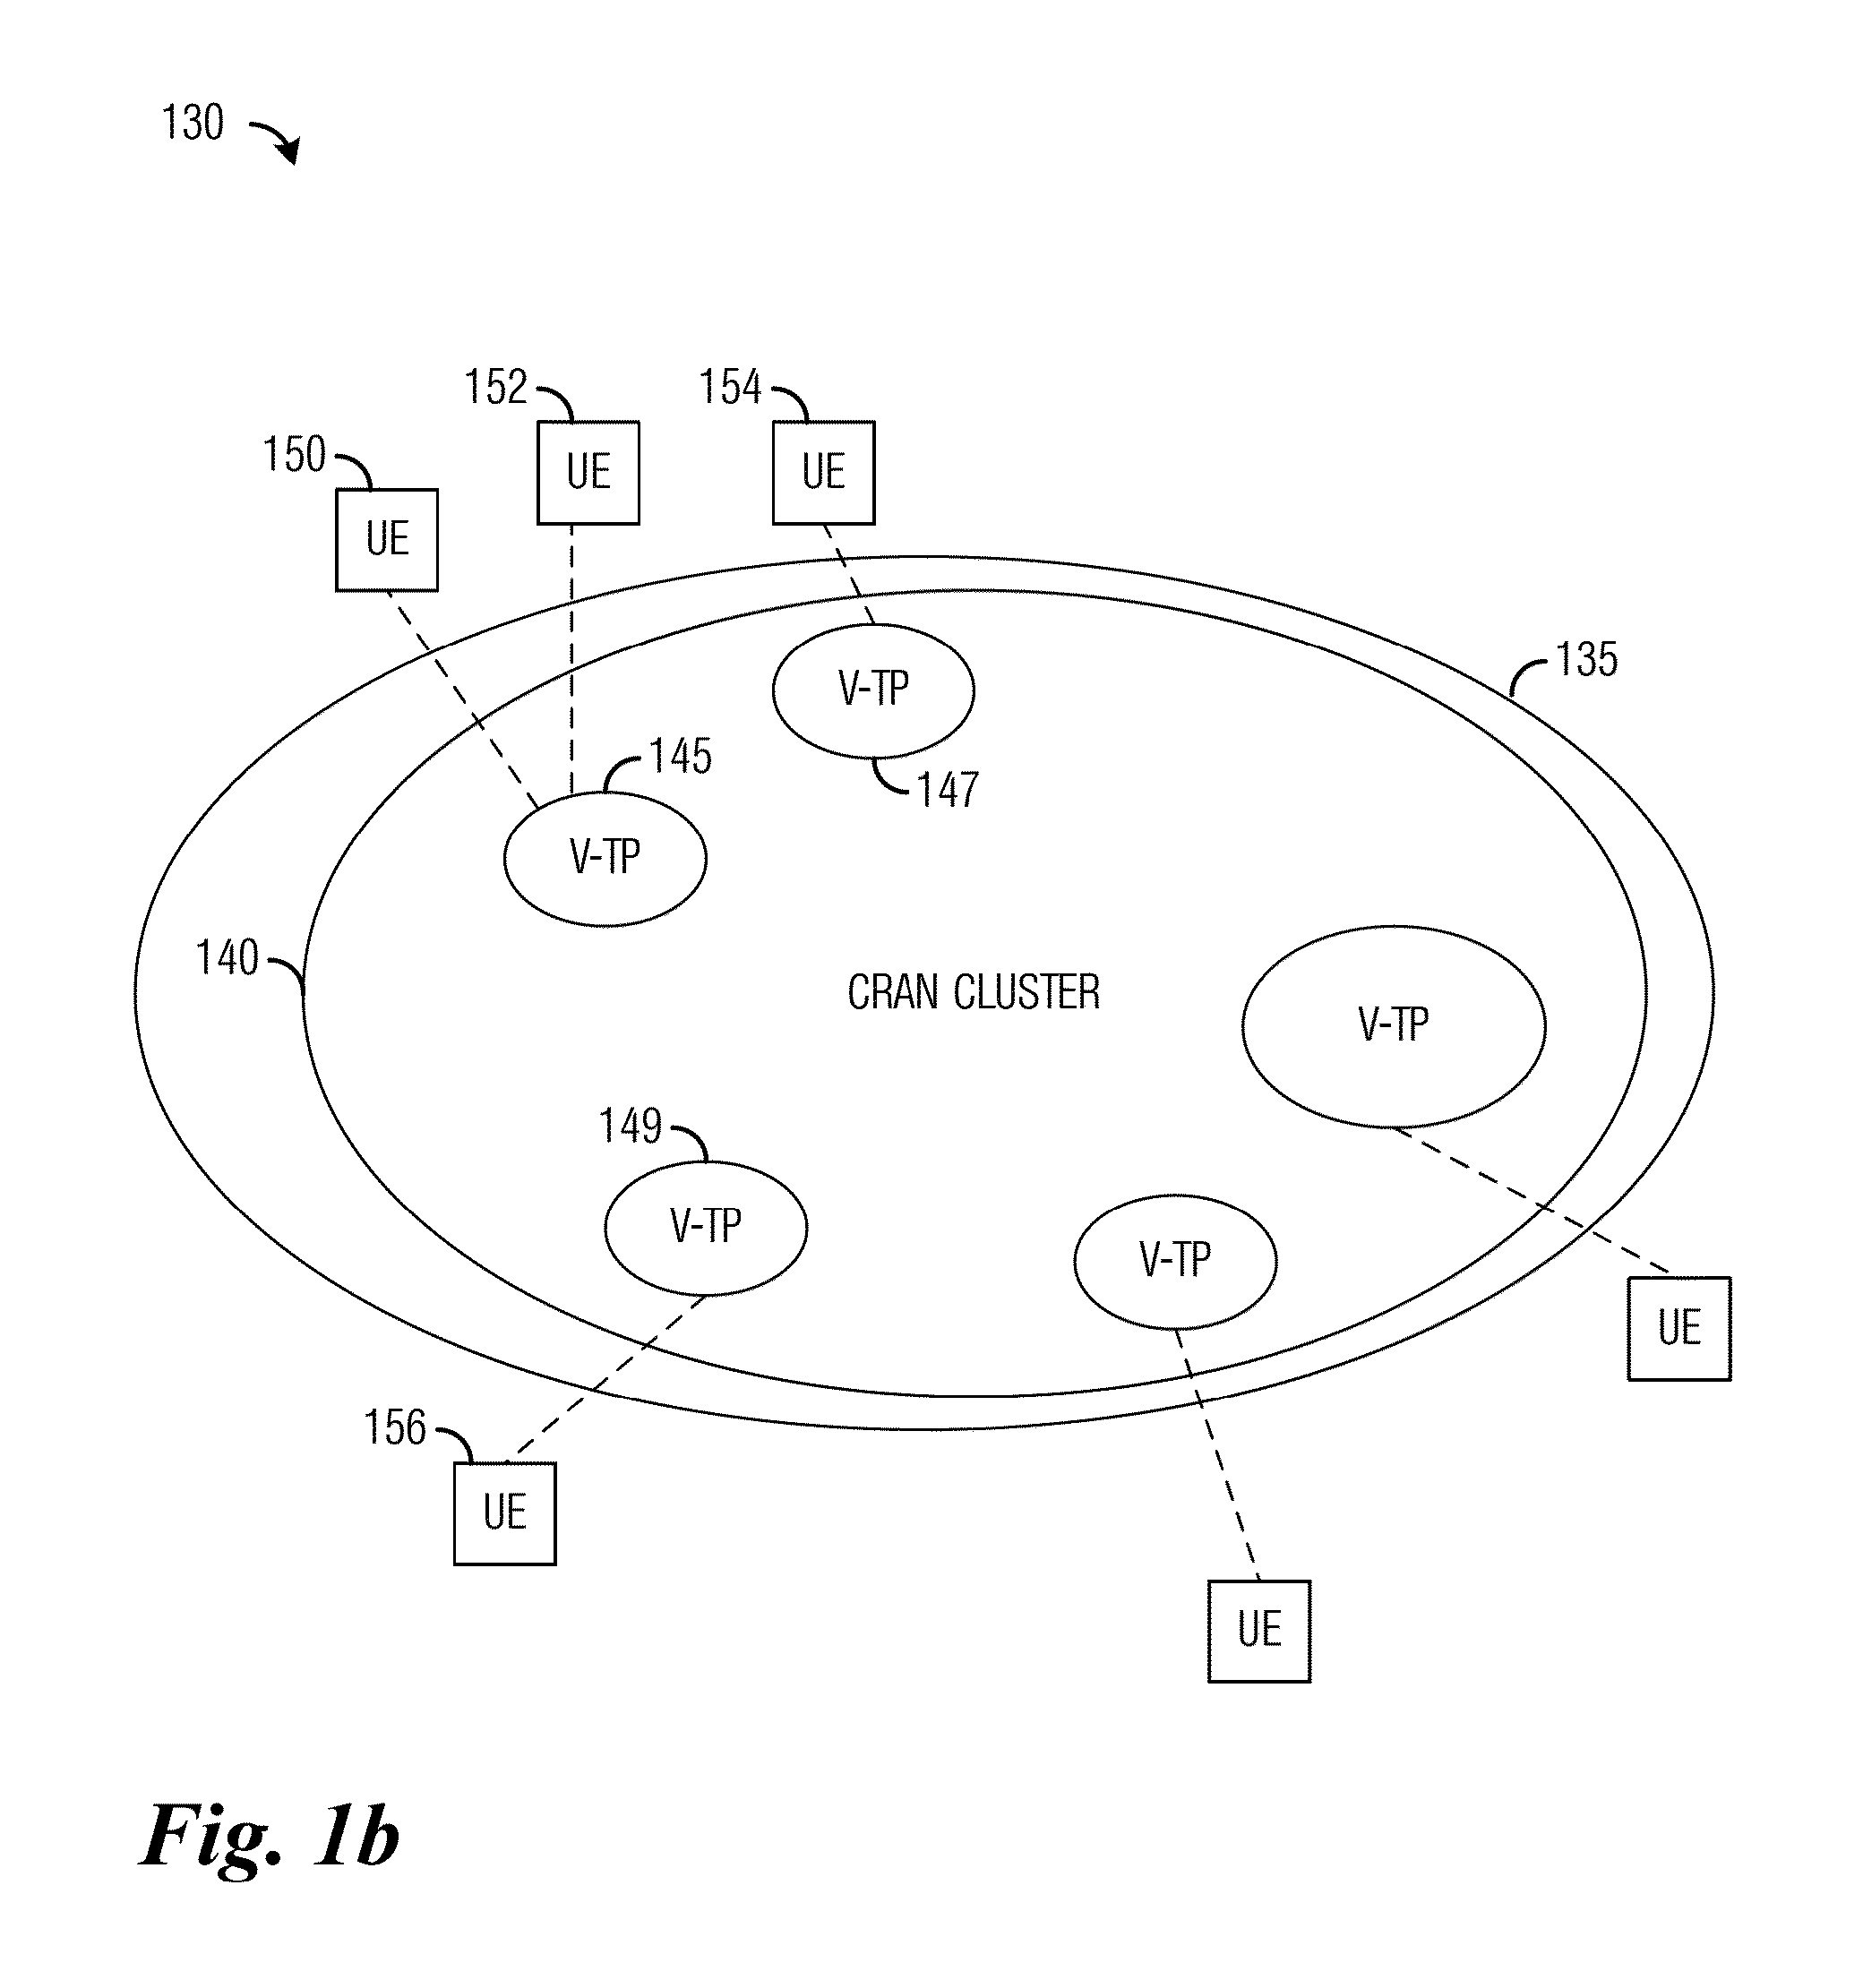 System and Method for Grouping and Selecting Transmission Points